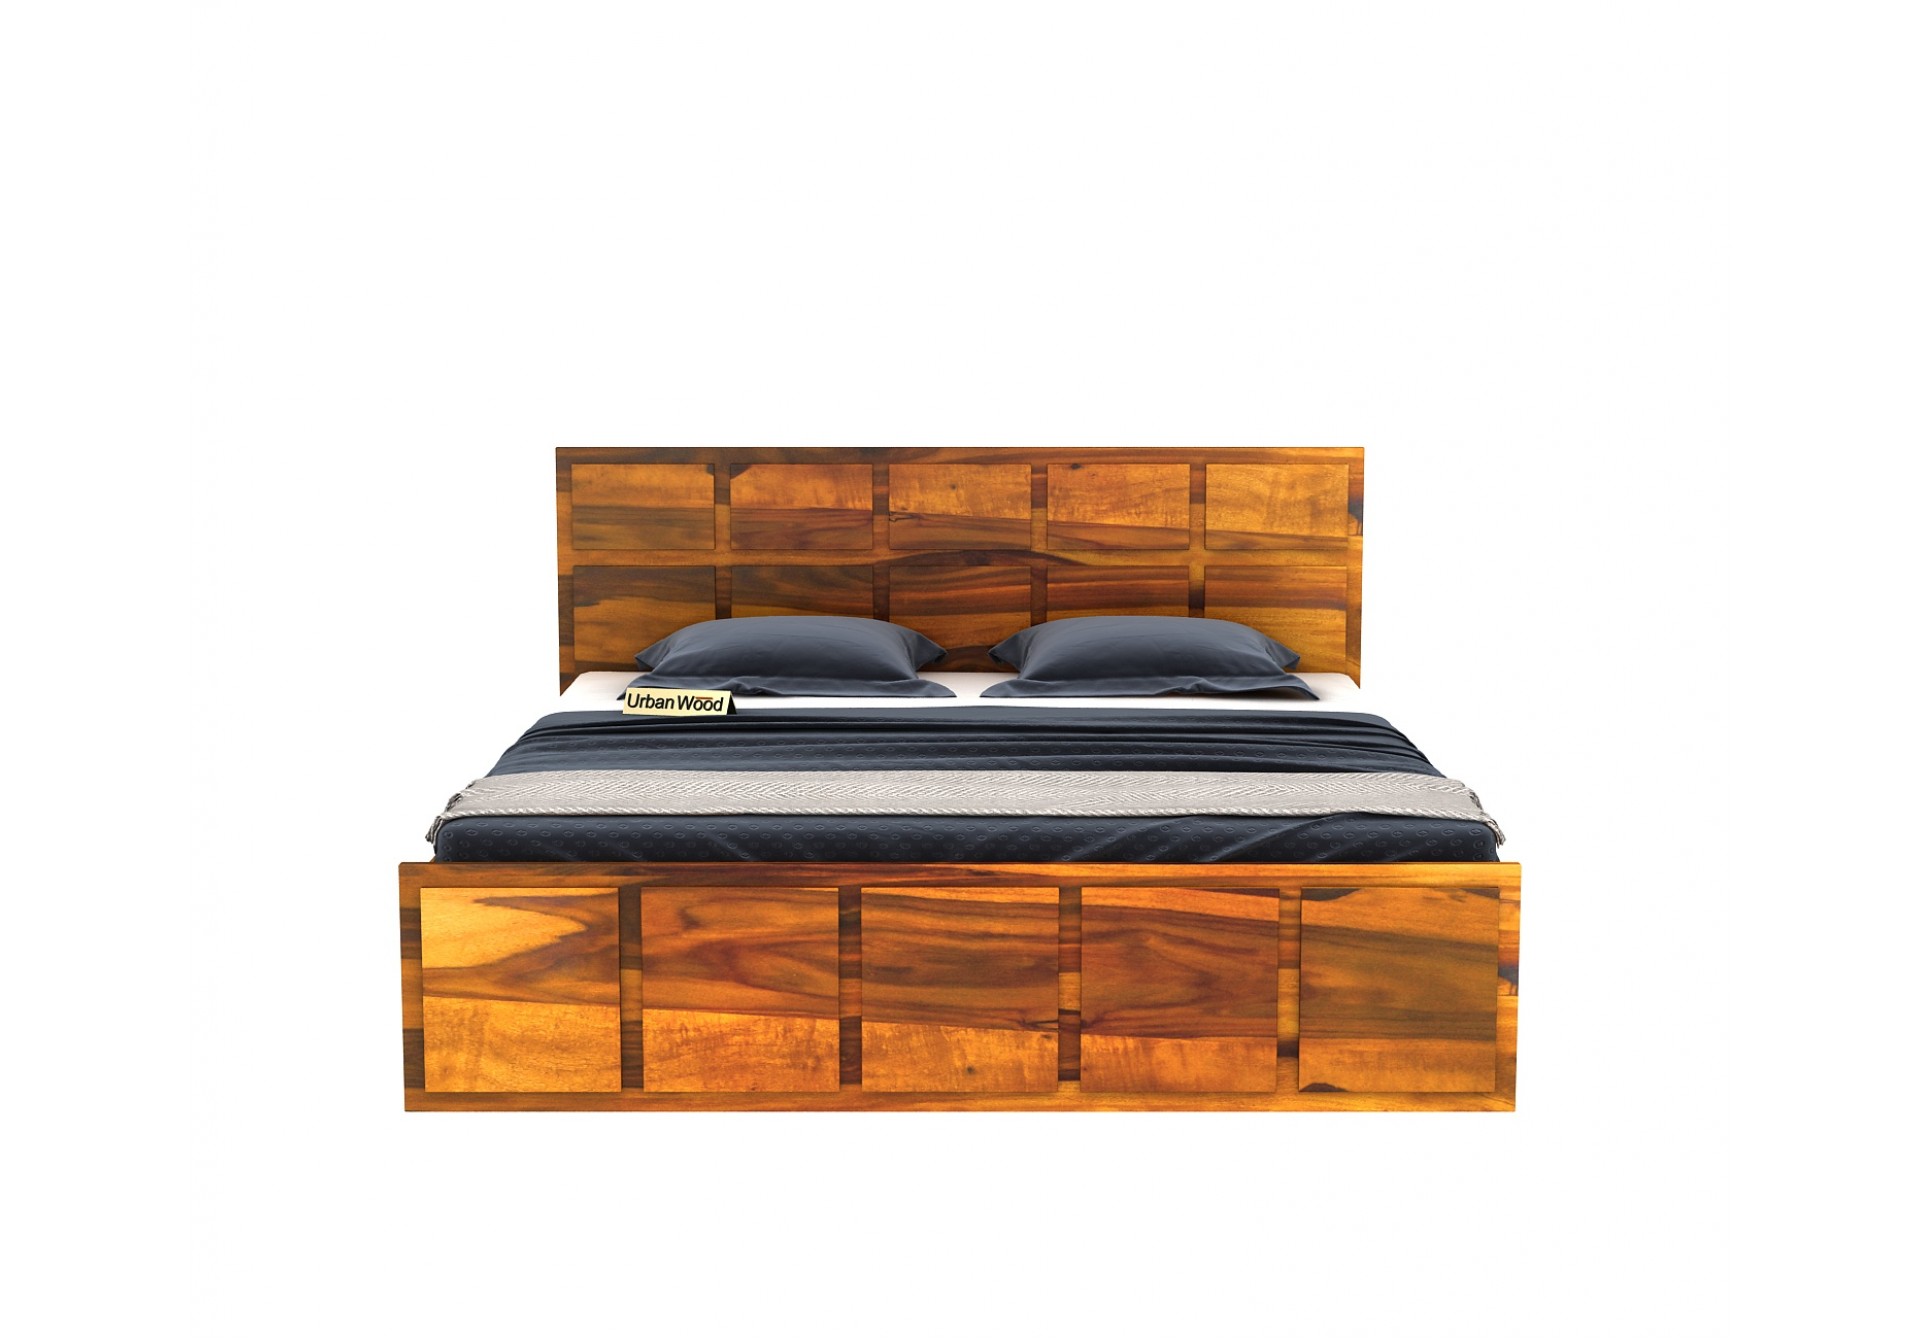 Bedswind Bed With Storage ( Queen Size, Honey Finish )